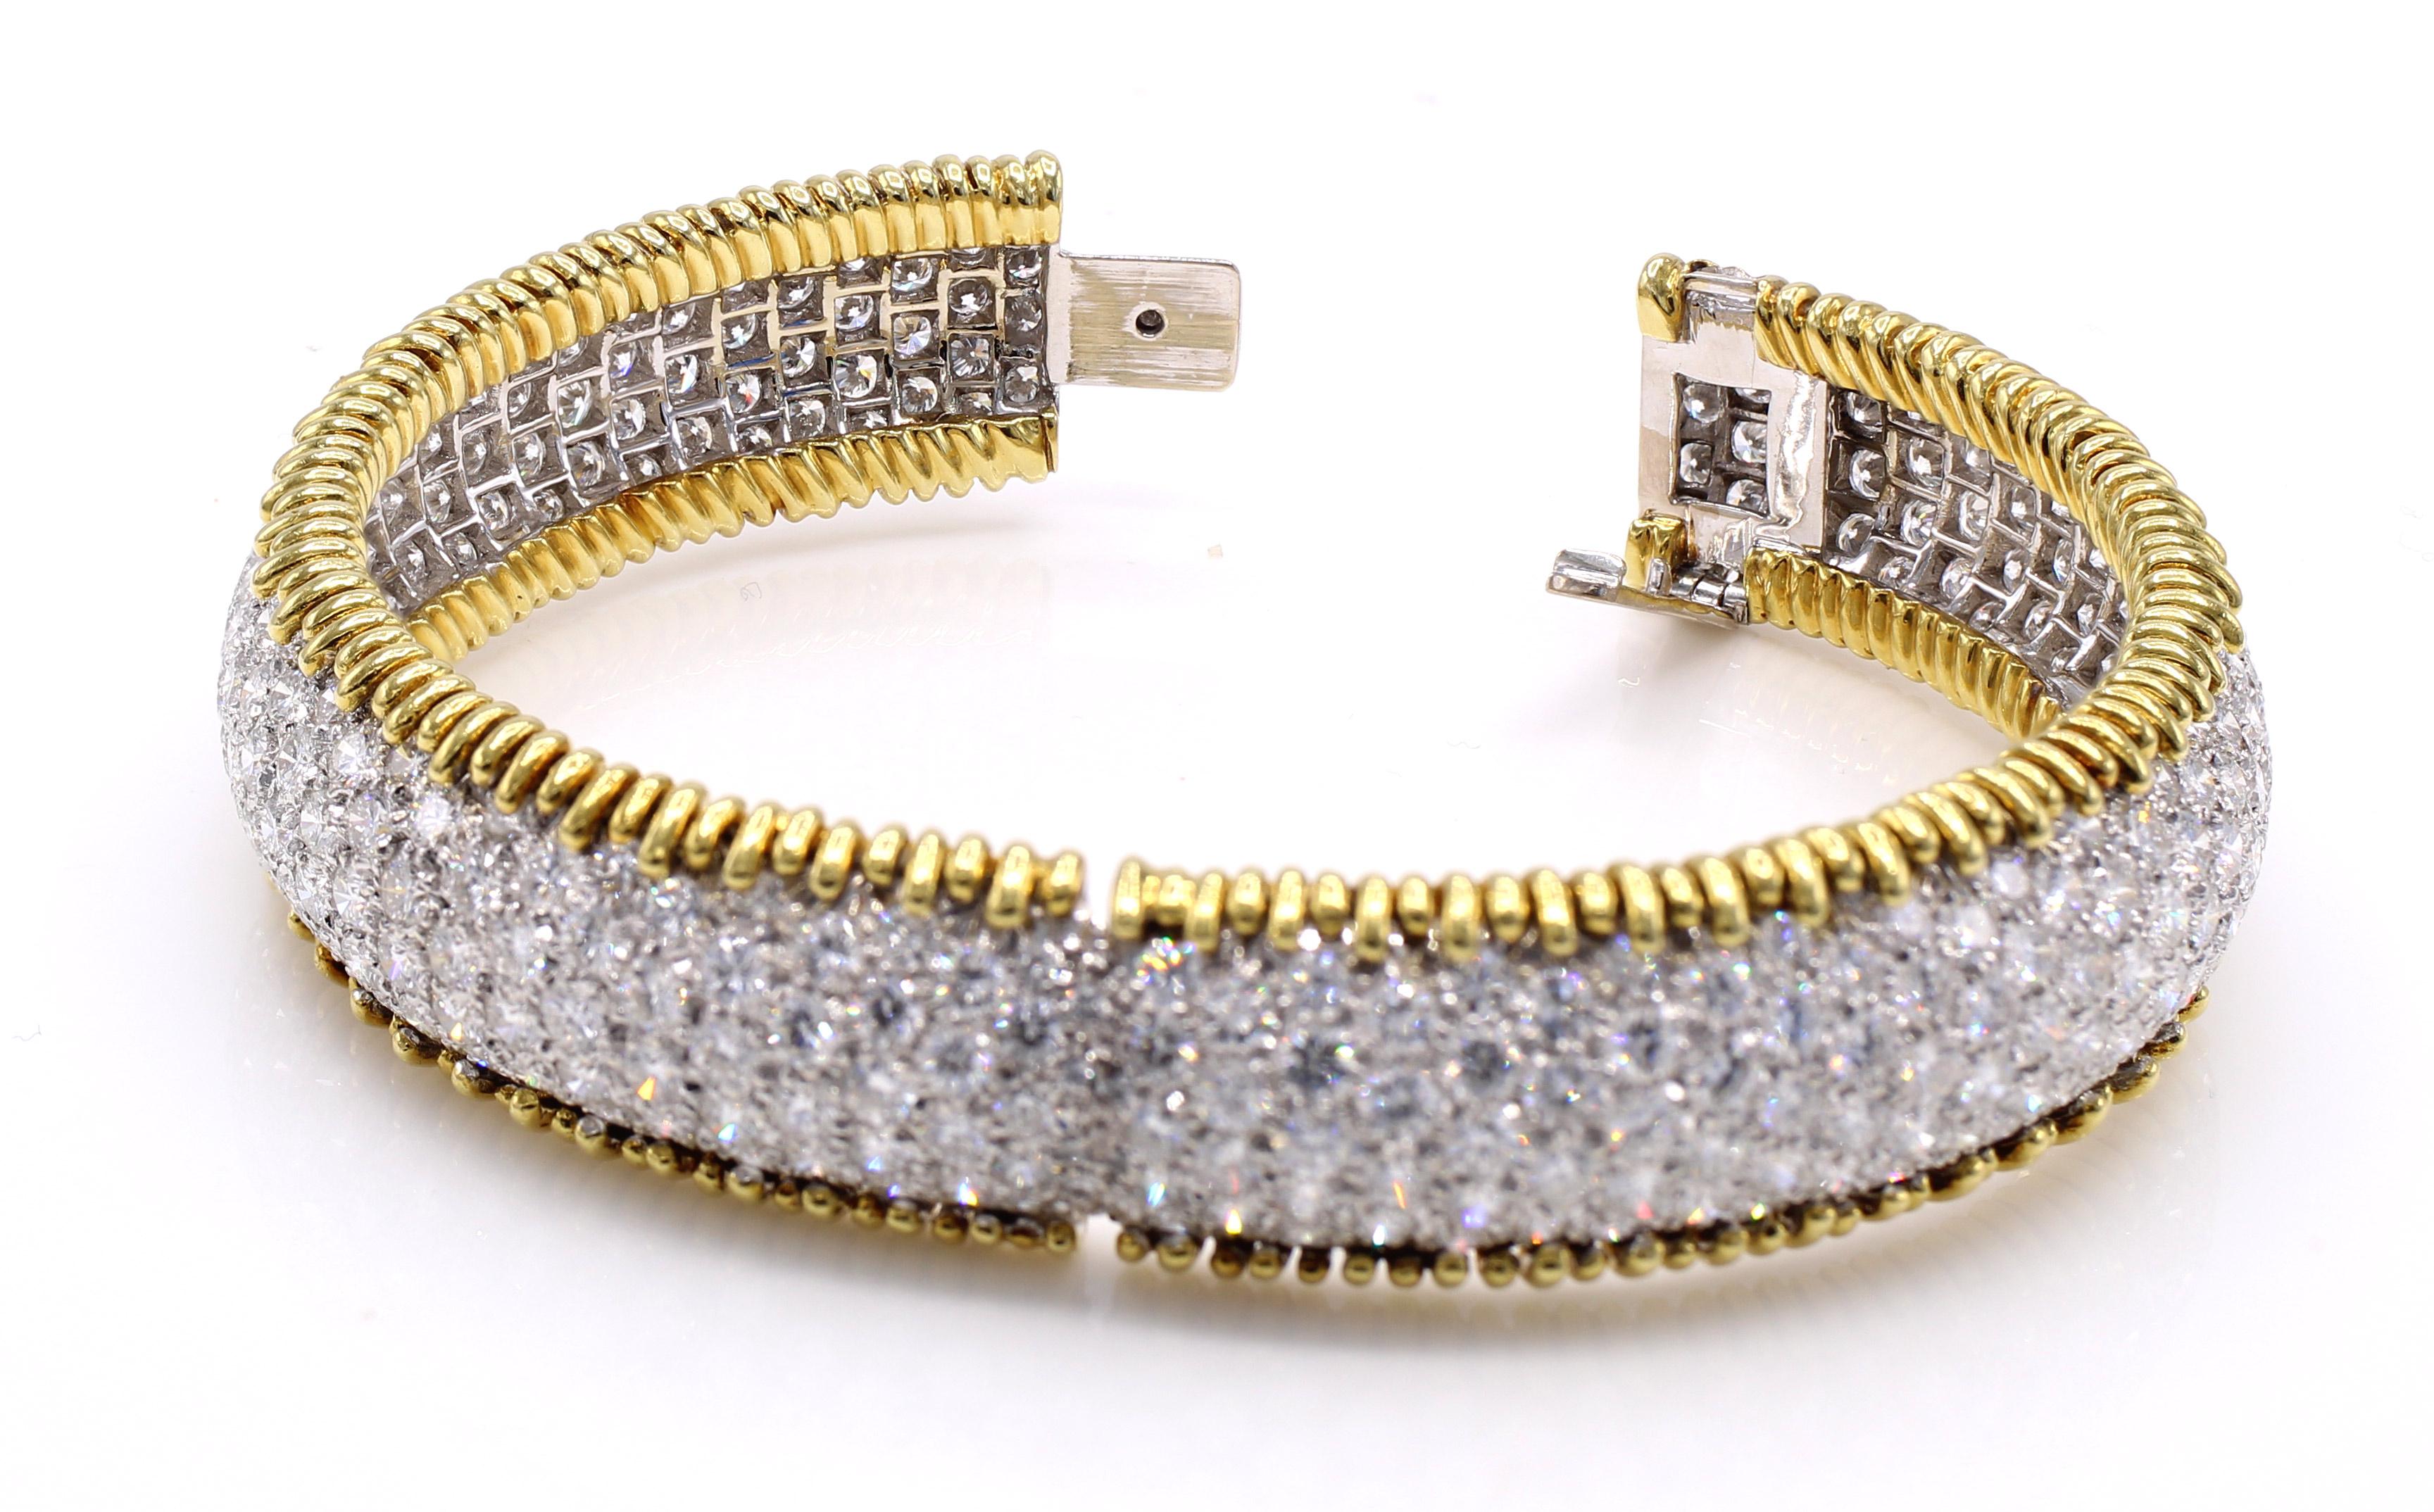 Beautifully designed and masterfully handcrafted in platinum and 18 karat yellow gold, this gorgeous bangle/cuff bracelet displays a river of sparkling white around the wrist. 333 perfectly matched round brilliant cut diamonds are pave set in